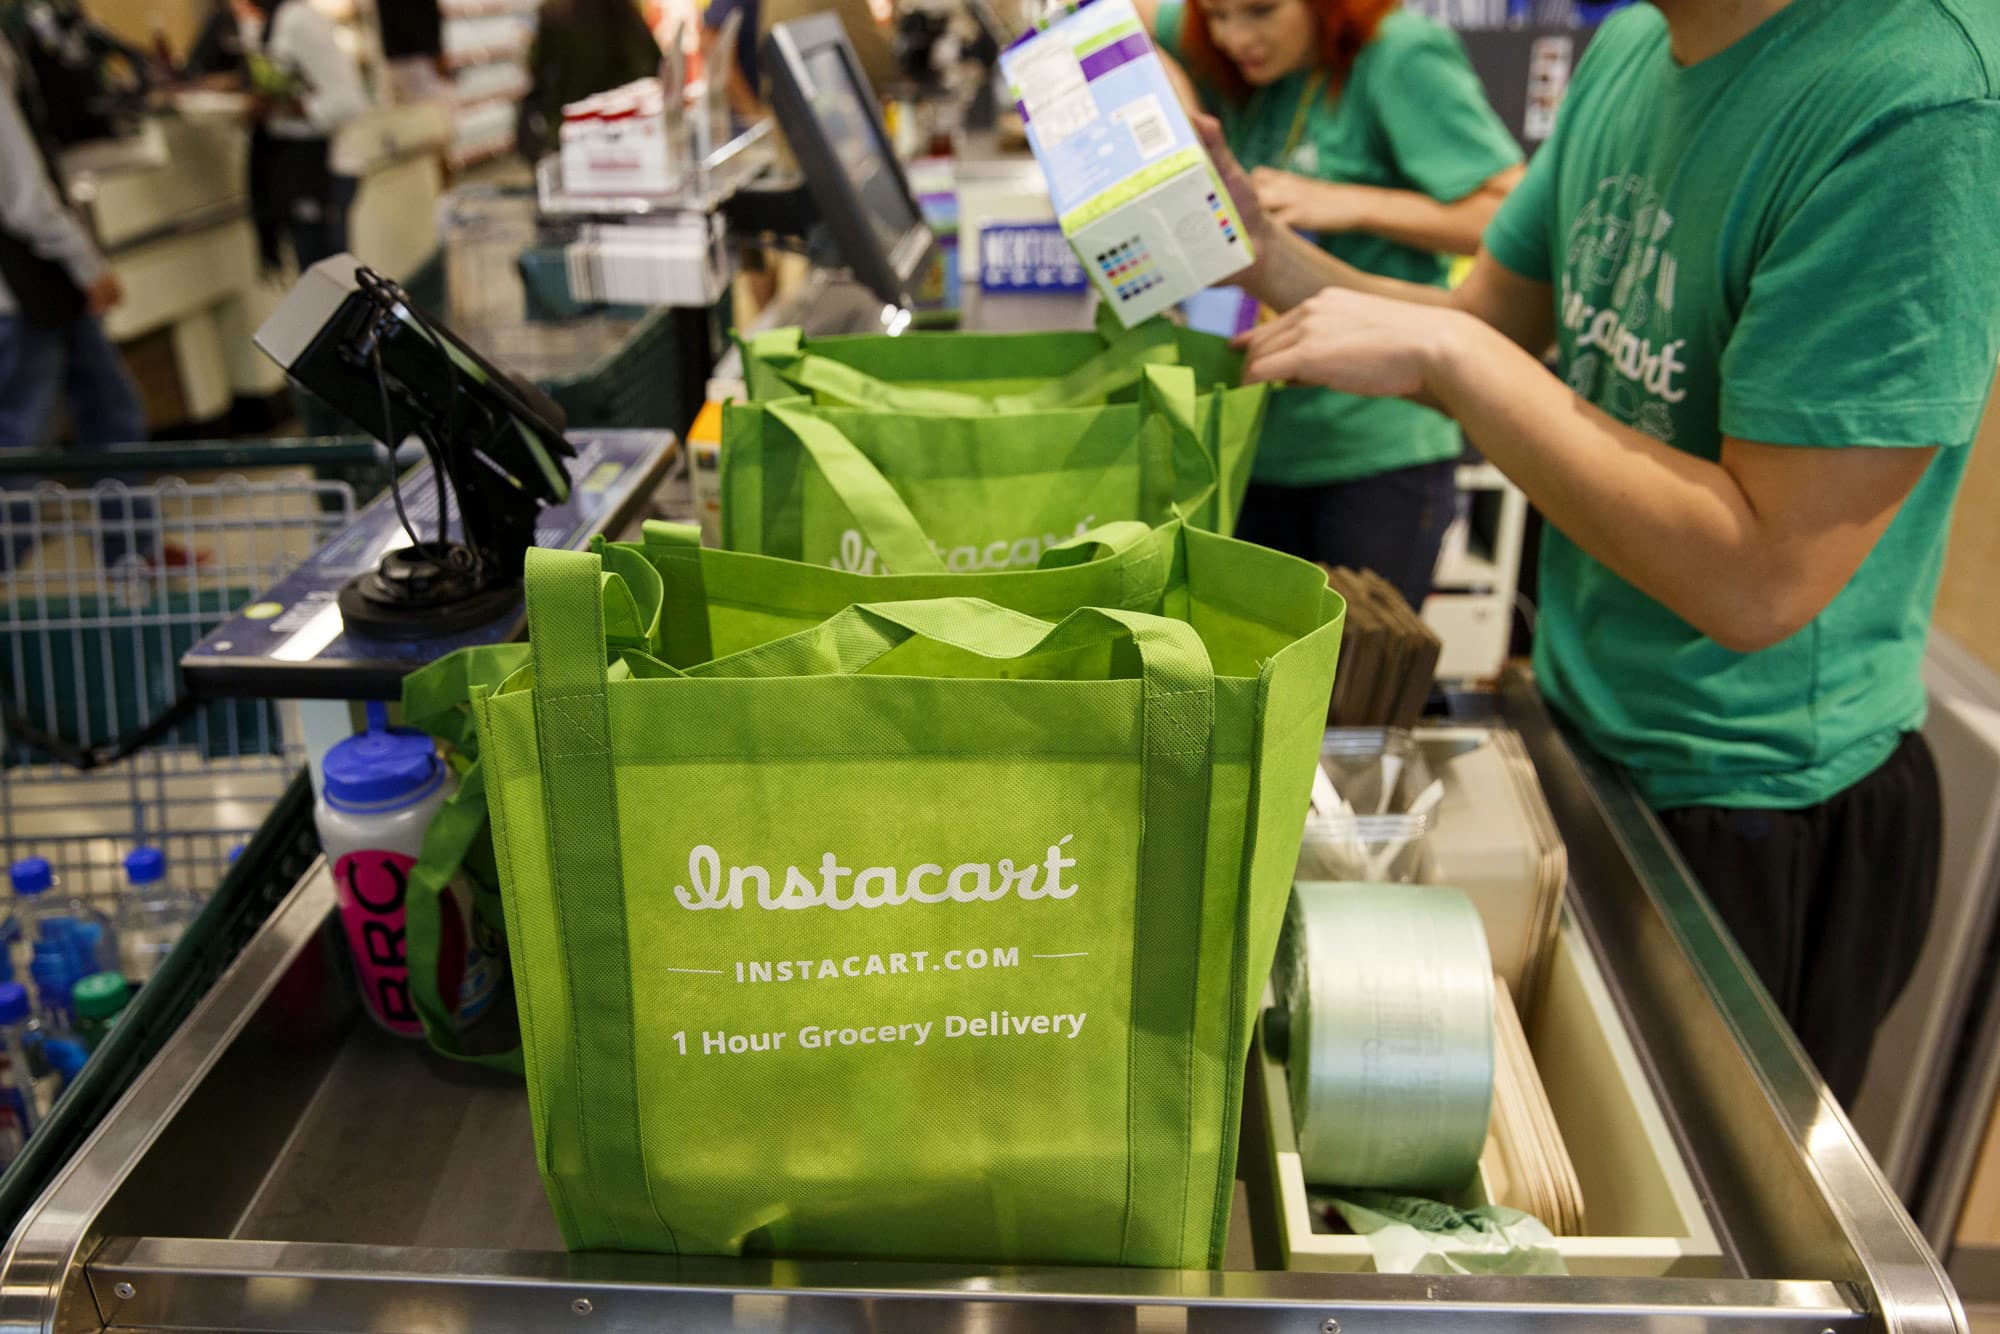 Dollar Tree’s Family Dollar uses Instacart to make same day deliveries